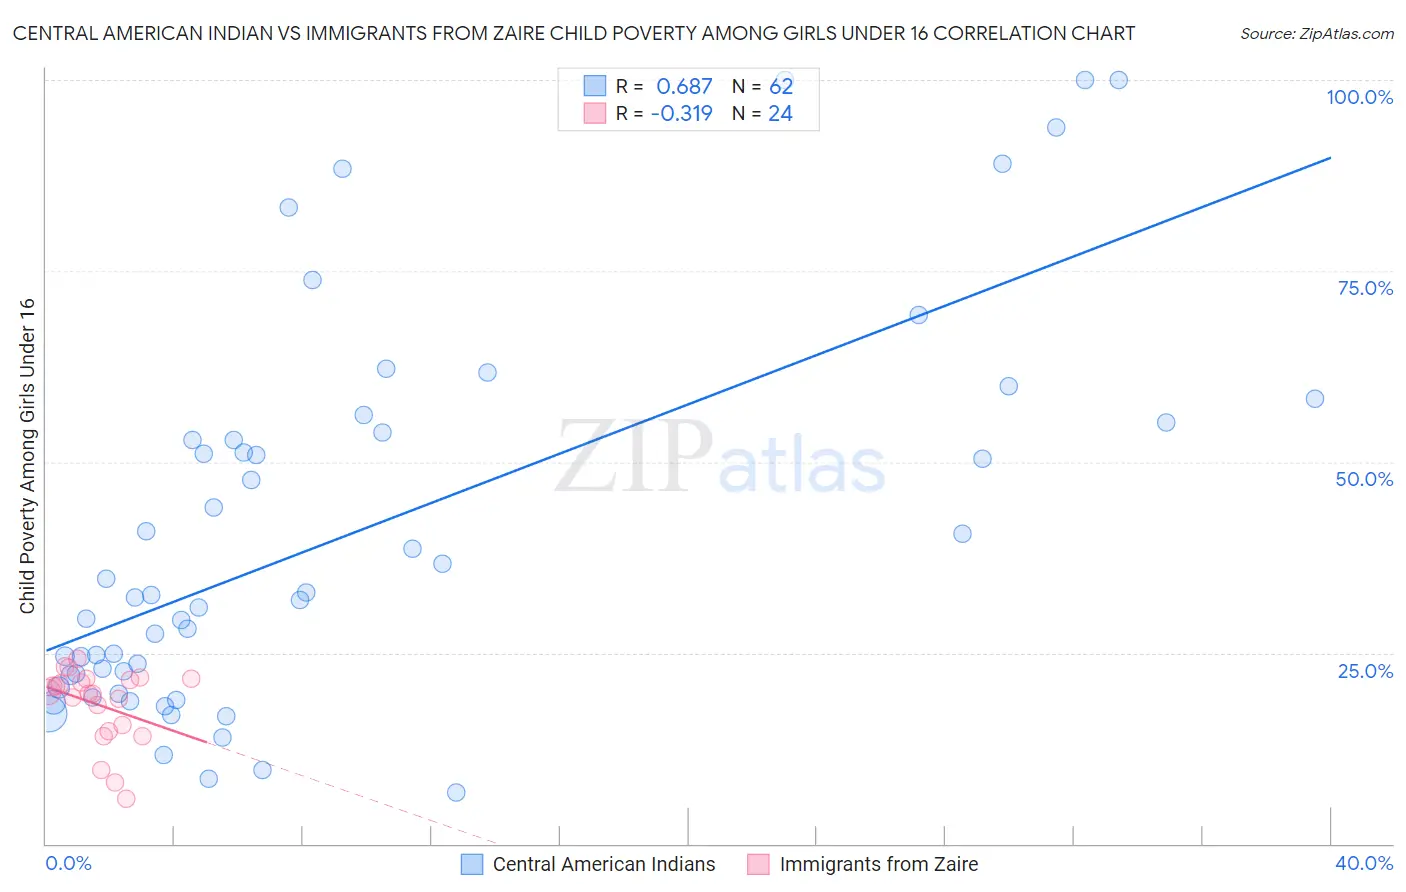 Central American Indian vs Immigrants from Zaire Child Poverty Among Girls Under 16